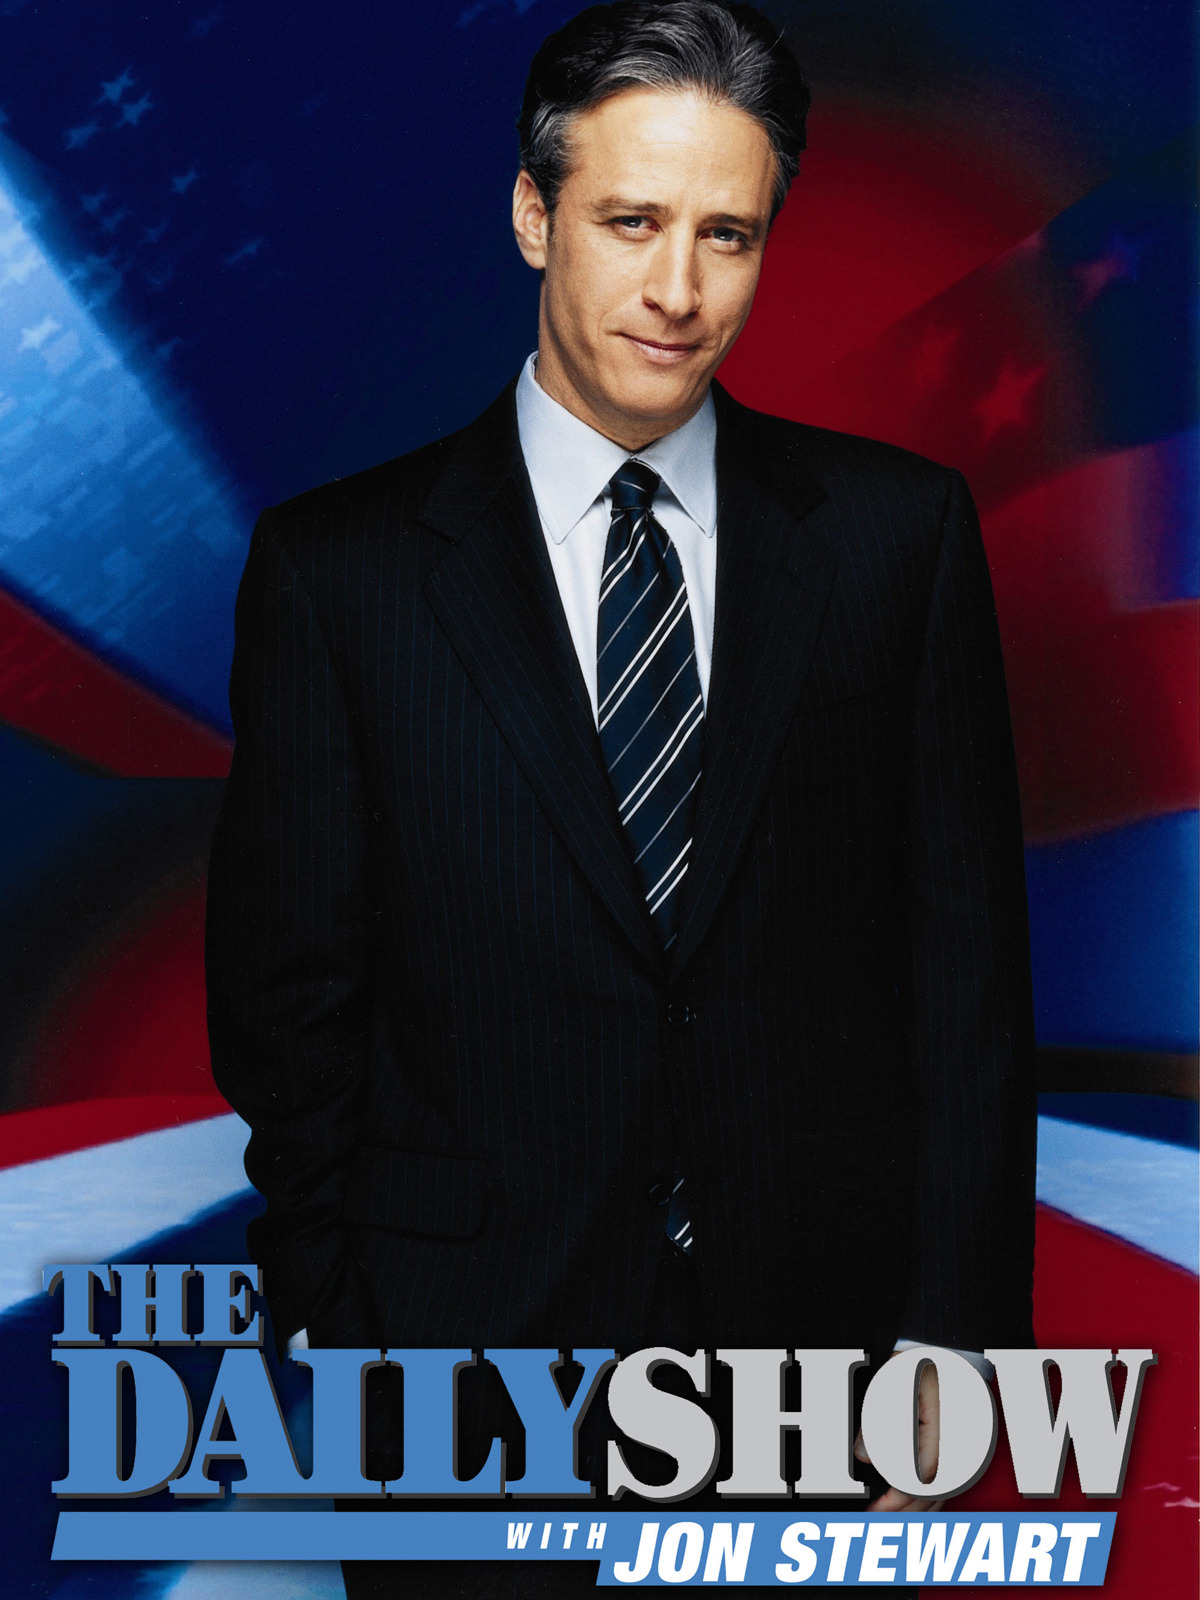 The Daily Show With Jon Stewart #10